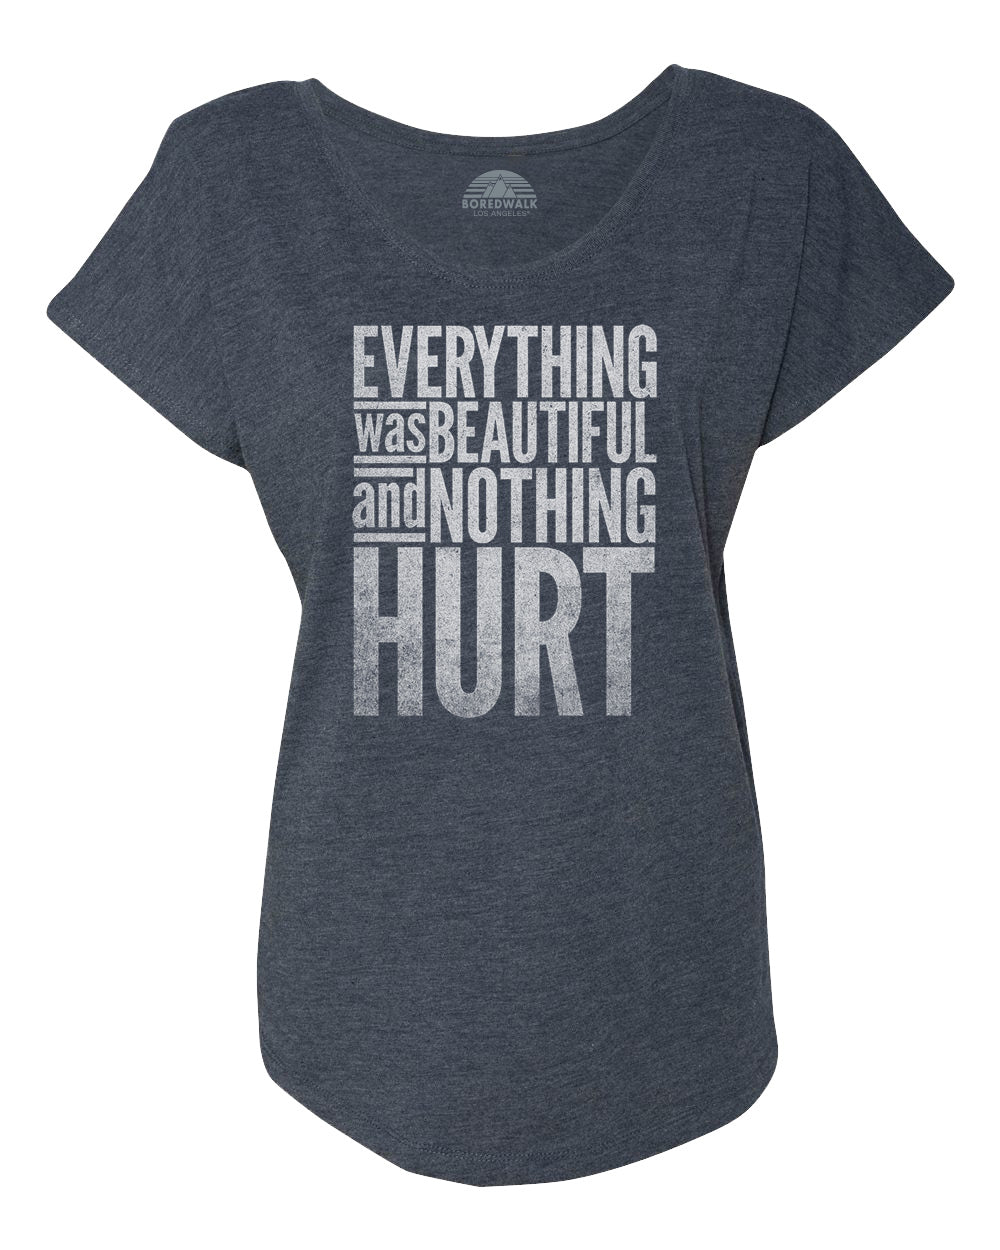 Women's Everything Was Beautiful and Nothing Hurt Scoop Neck T-Shirt